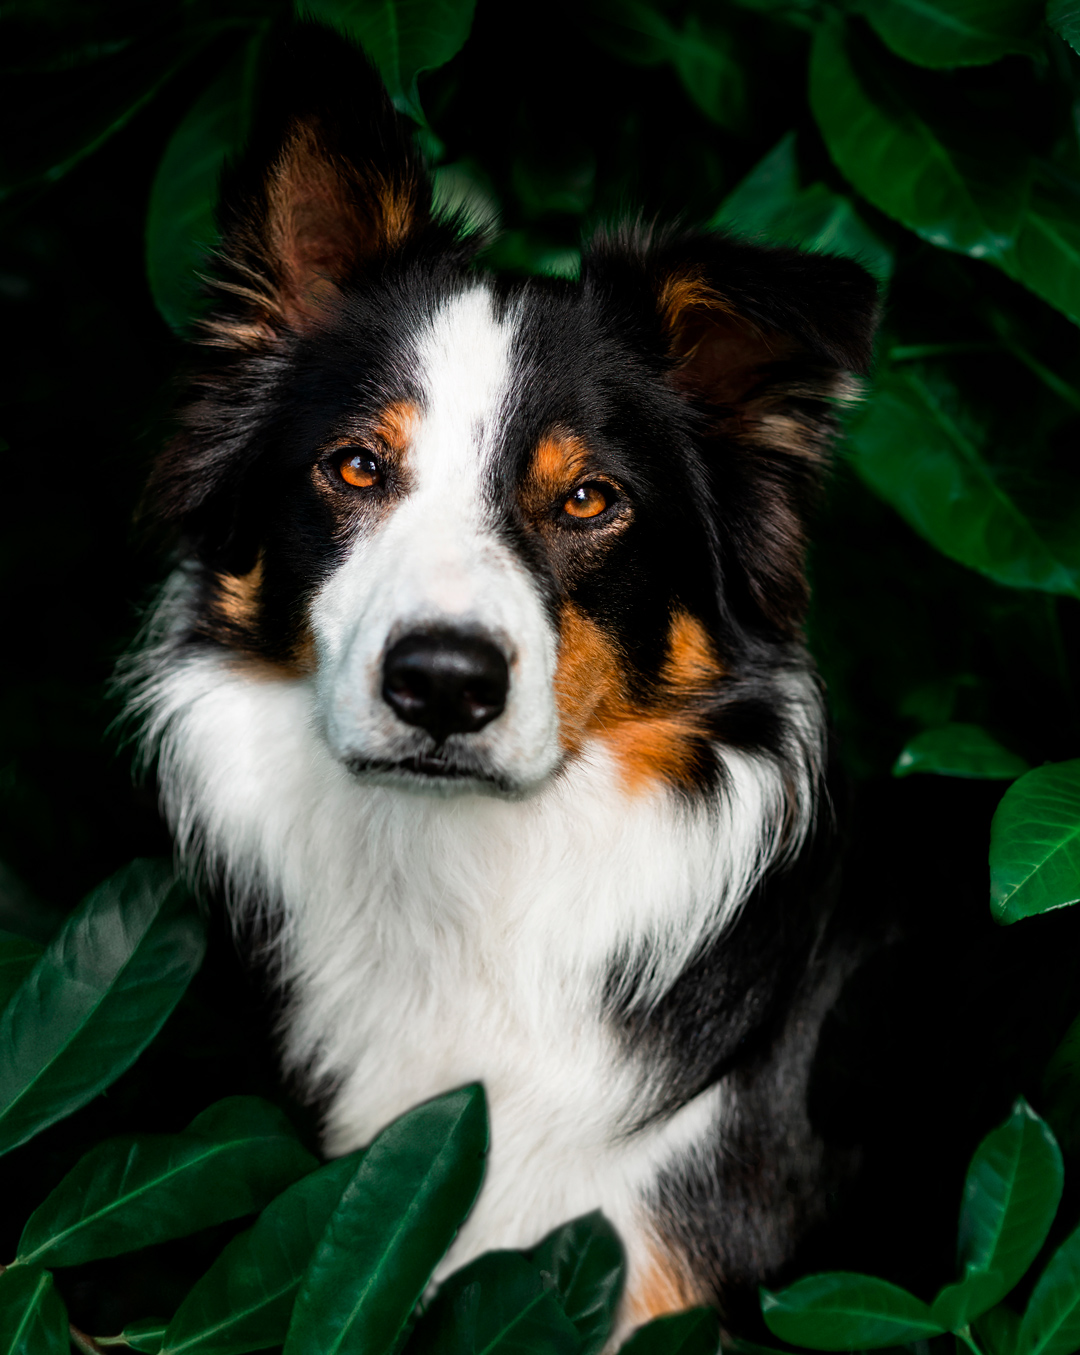 Outdoor moody pet portrait of tri color border collie in forest fern foliage